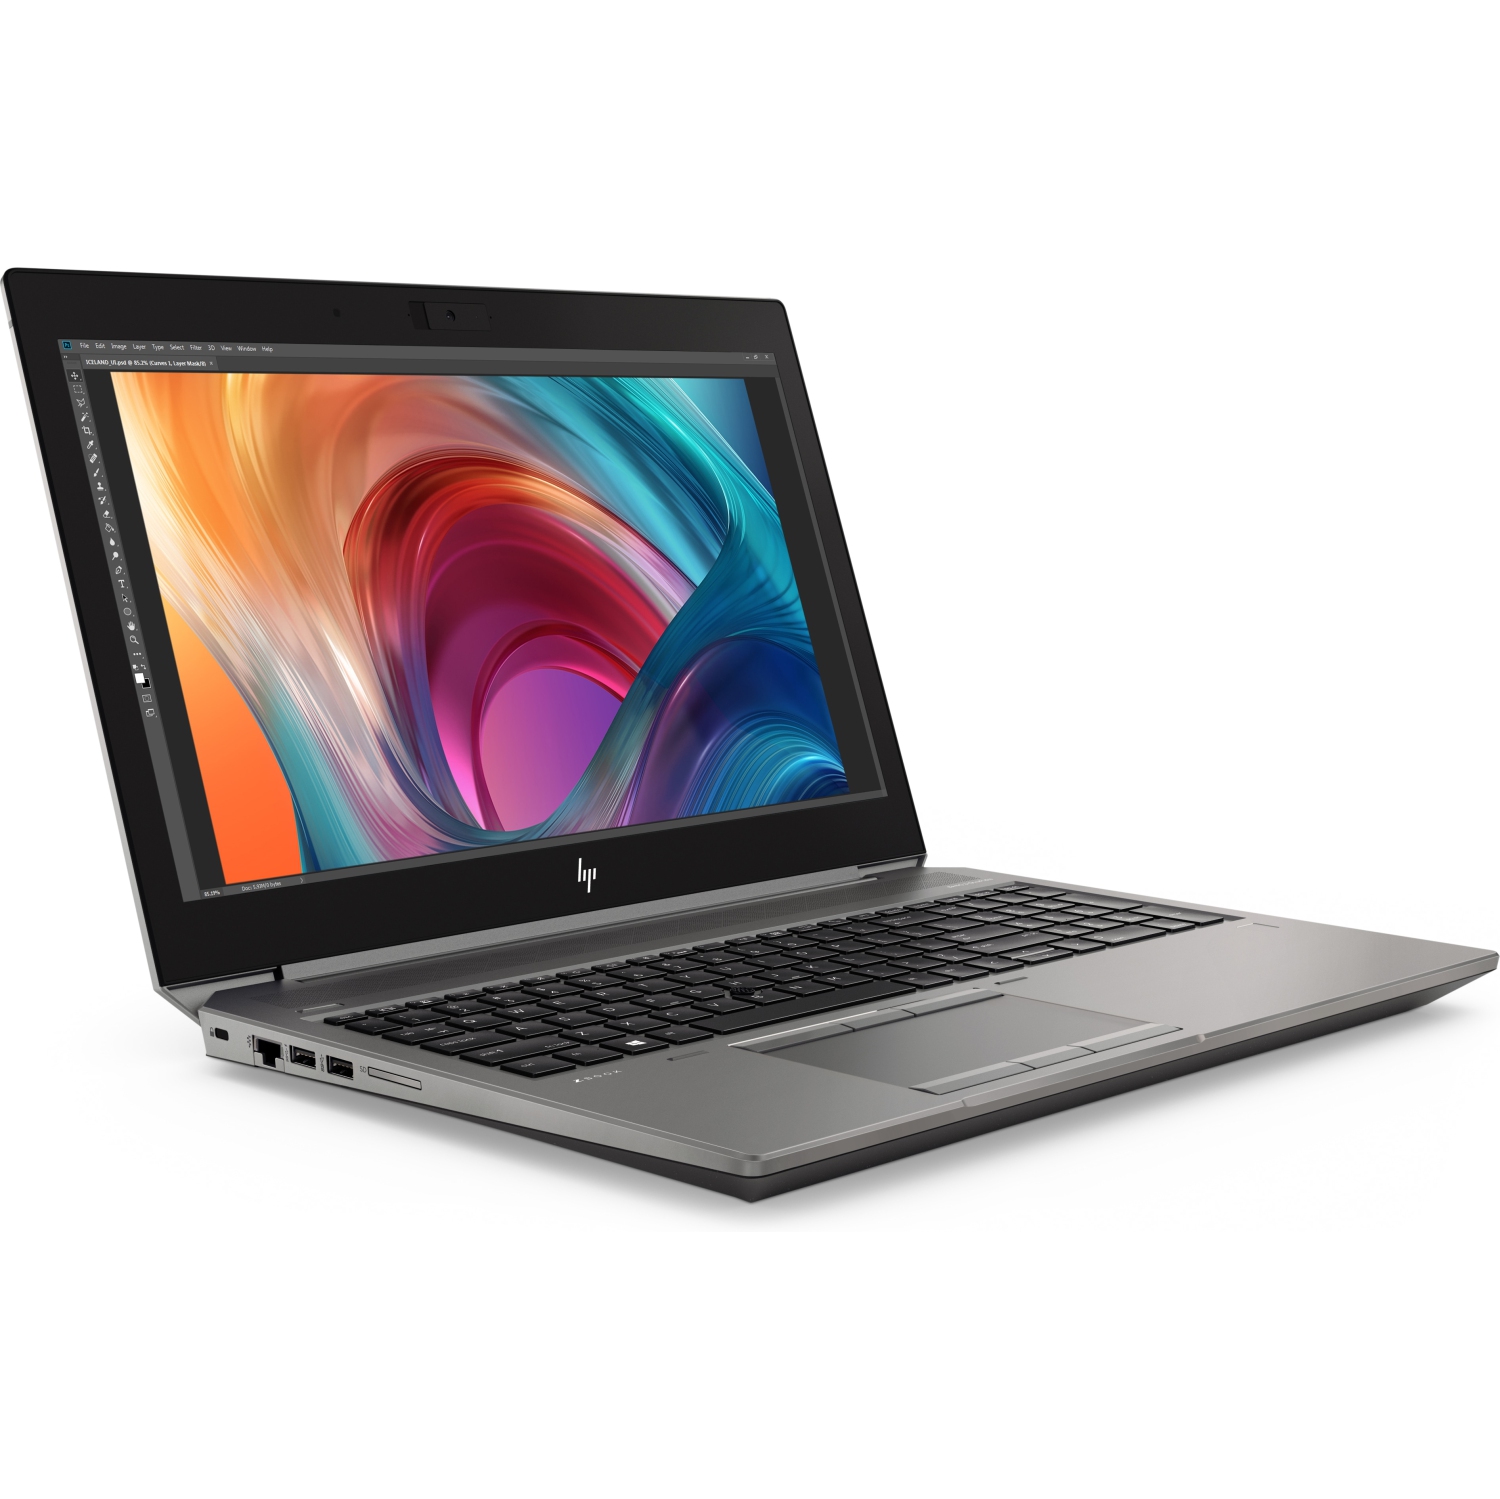 Refurbished ( Excellent ) Hp zbook 15 G6 15.6 Inch Intel Xeon E-2286M 2.40 @ 5.00 GHz 8 cores/32 GB RAM/1 TO SSD NVme/Nvidia Quadro T2000/ Windows 11 pro/1 year warranty